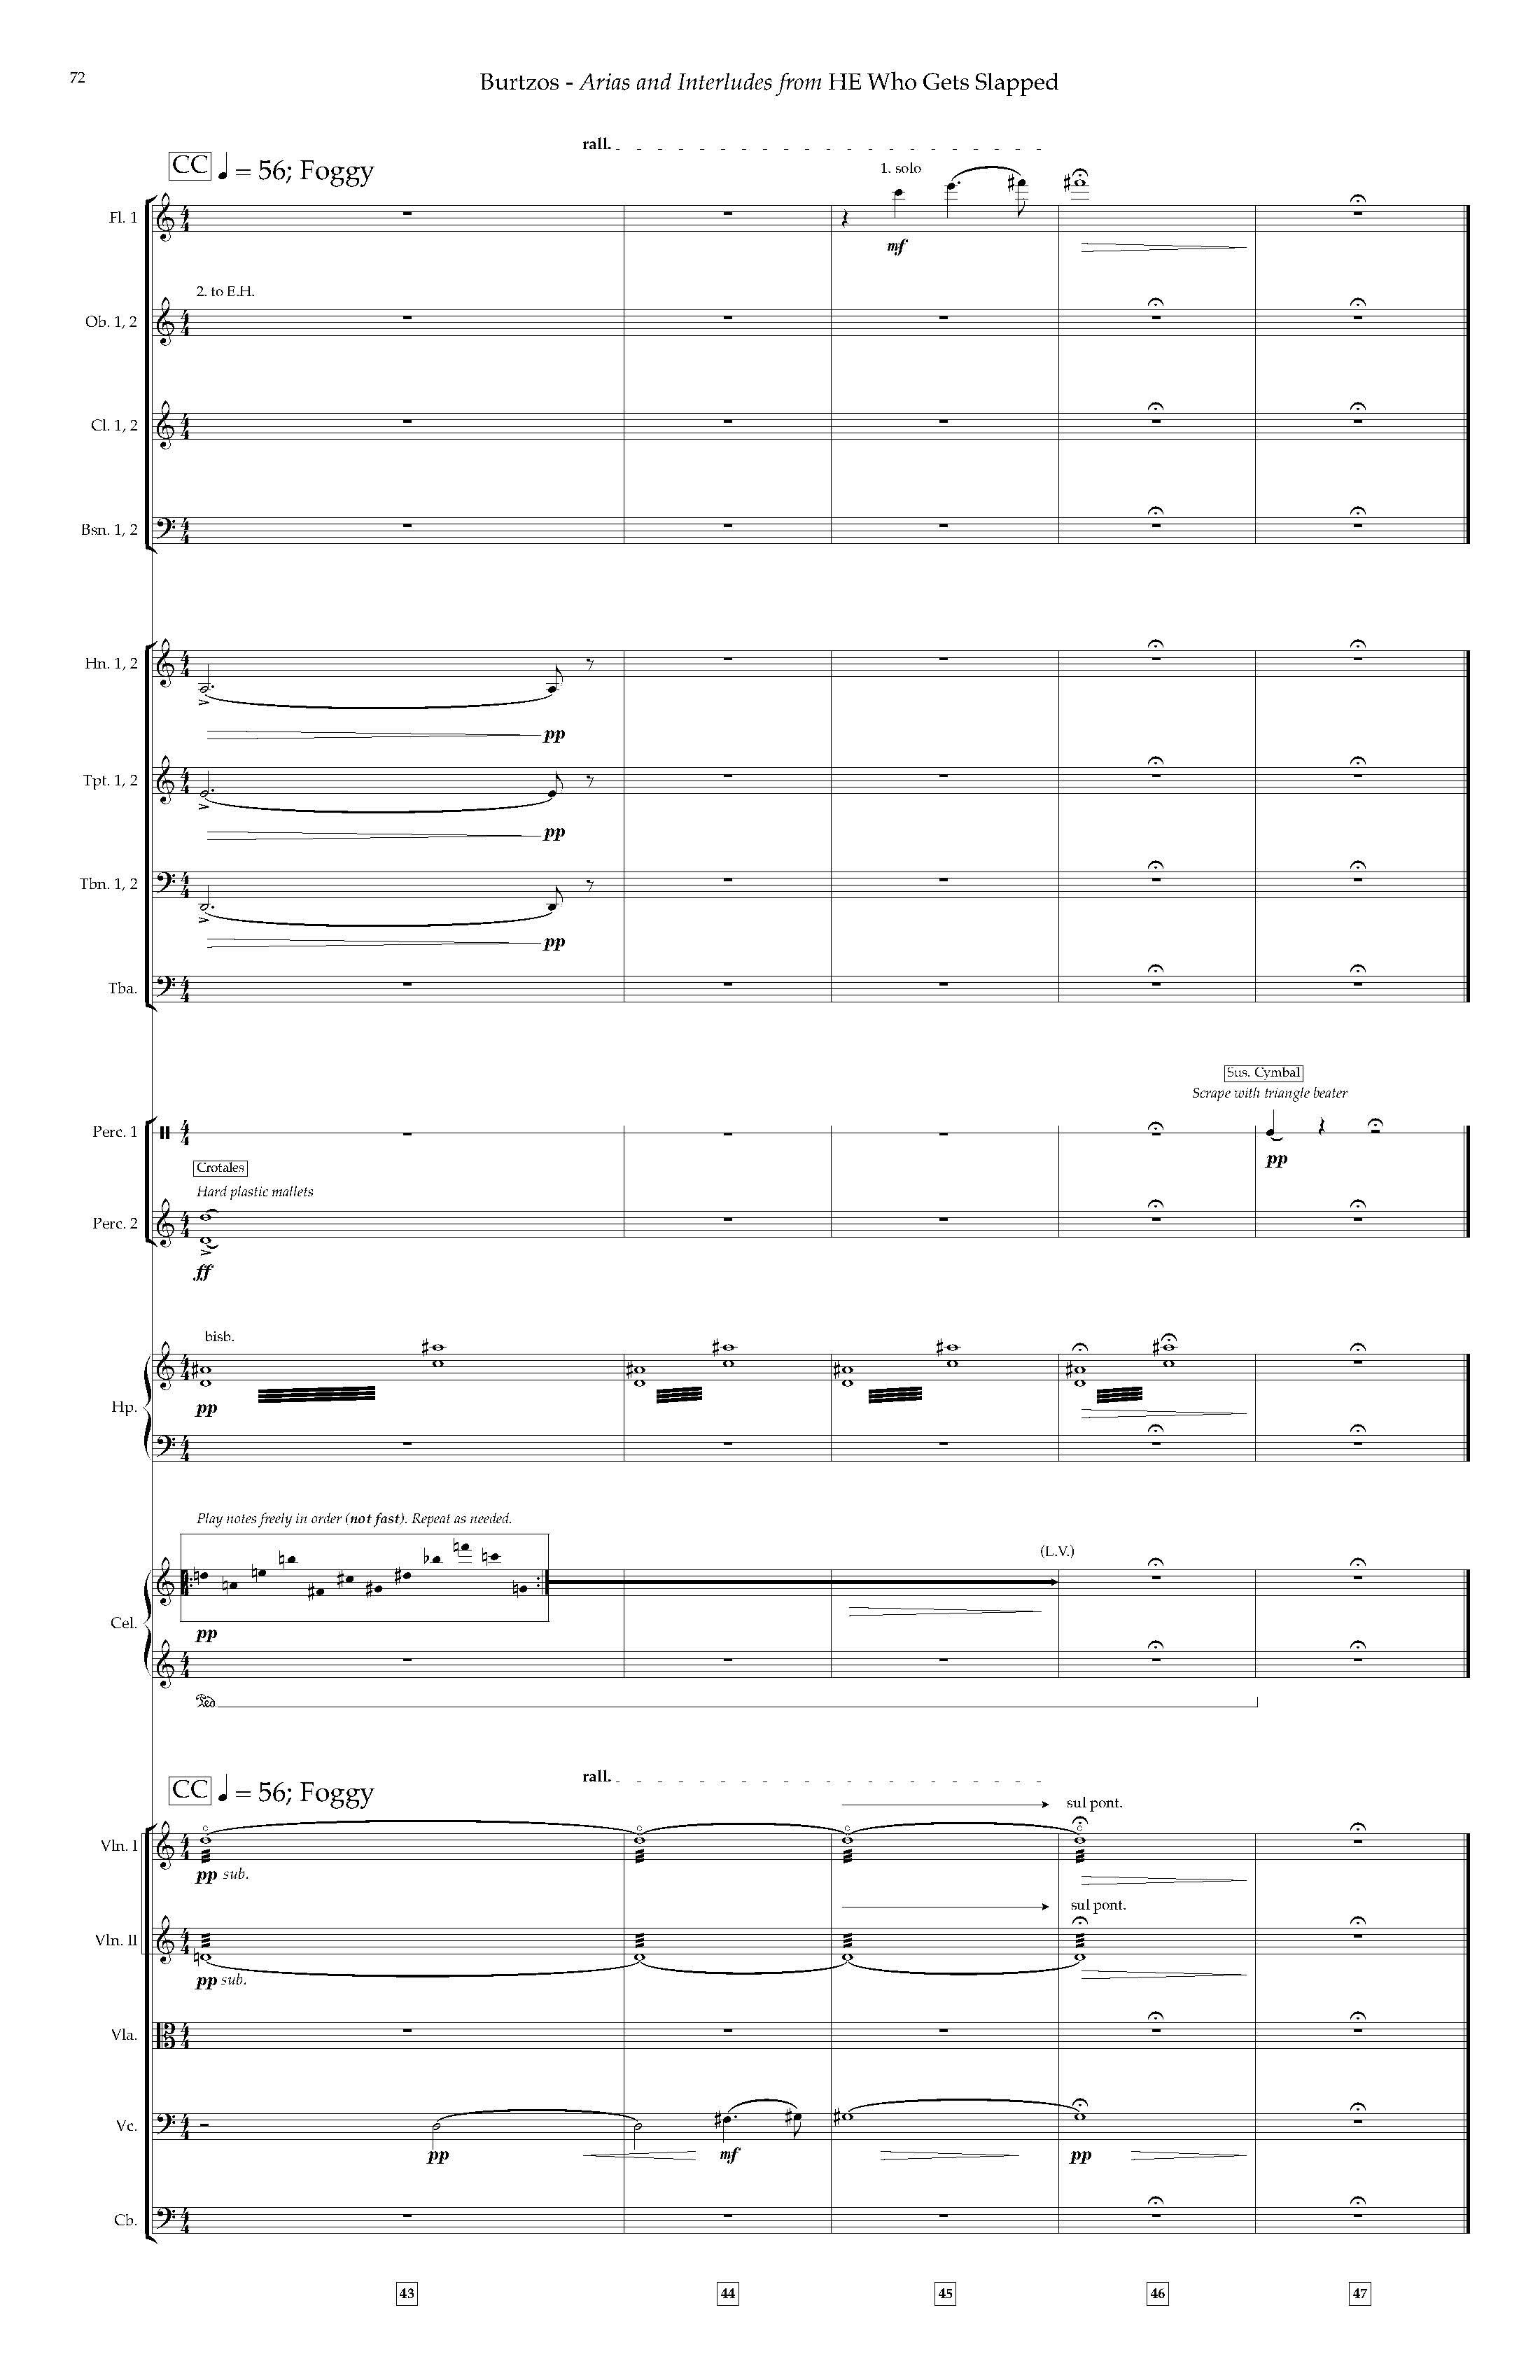 Arias and Interludes from HWGS - Complete Score_Page_78.jpg